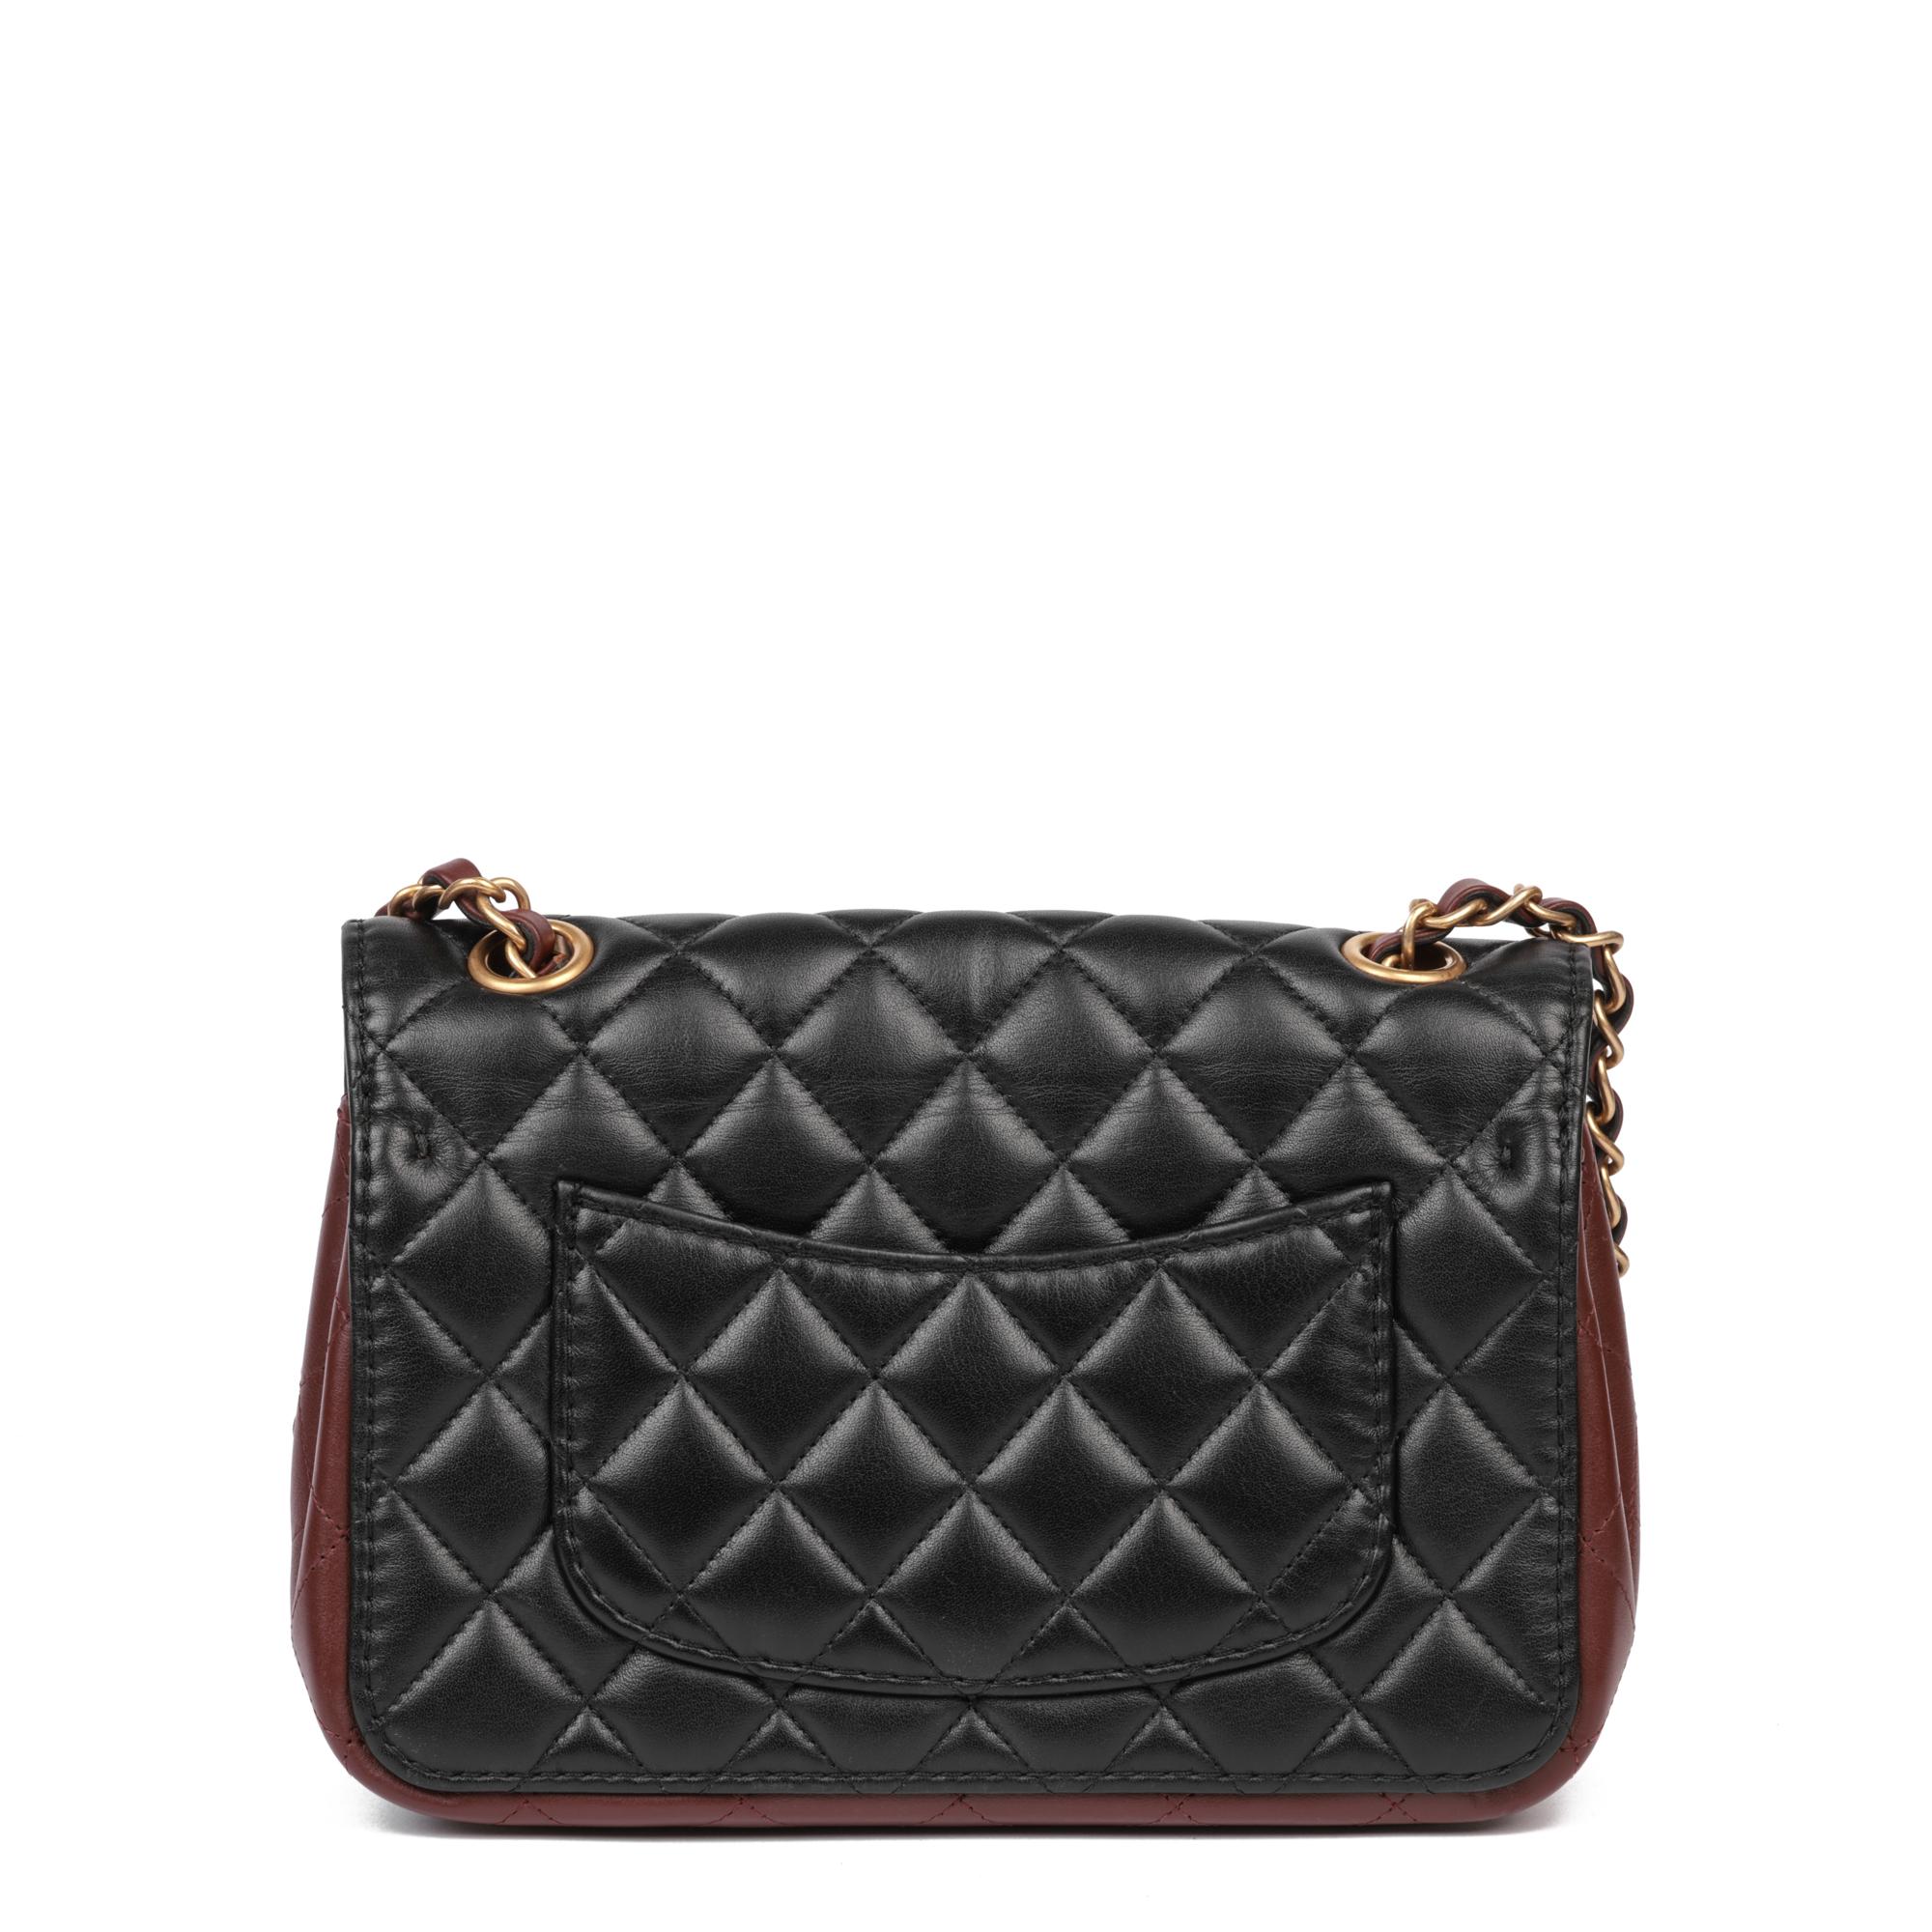 CHANEL Black & Burgundy Quilted Lambskin Small Classic Single Flap Bag In Excellent Condition For Sale In Bishop's Stortford, Hertfordshire